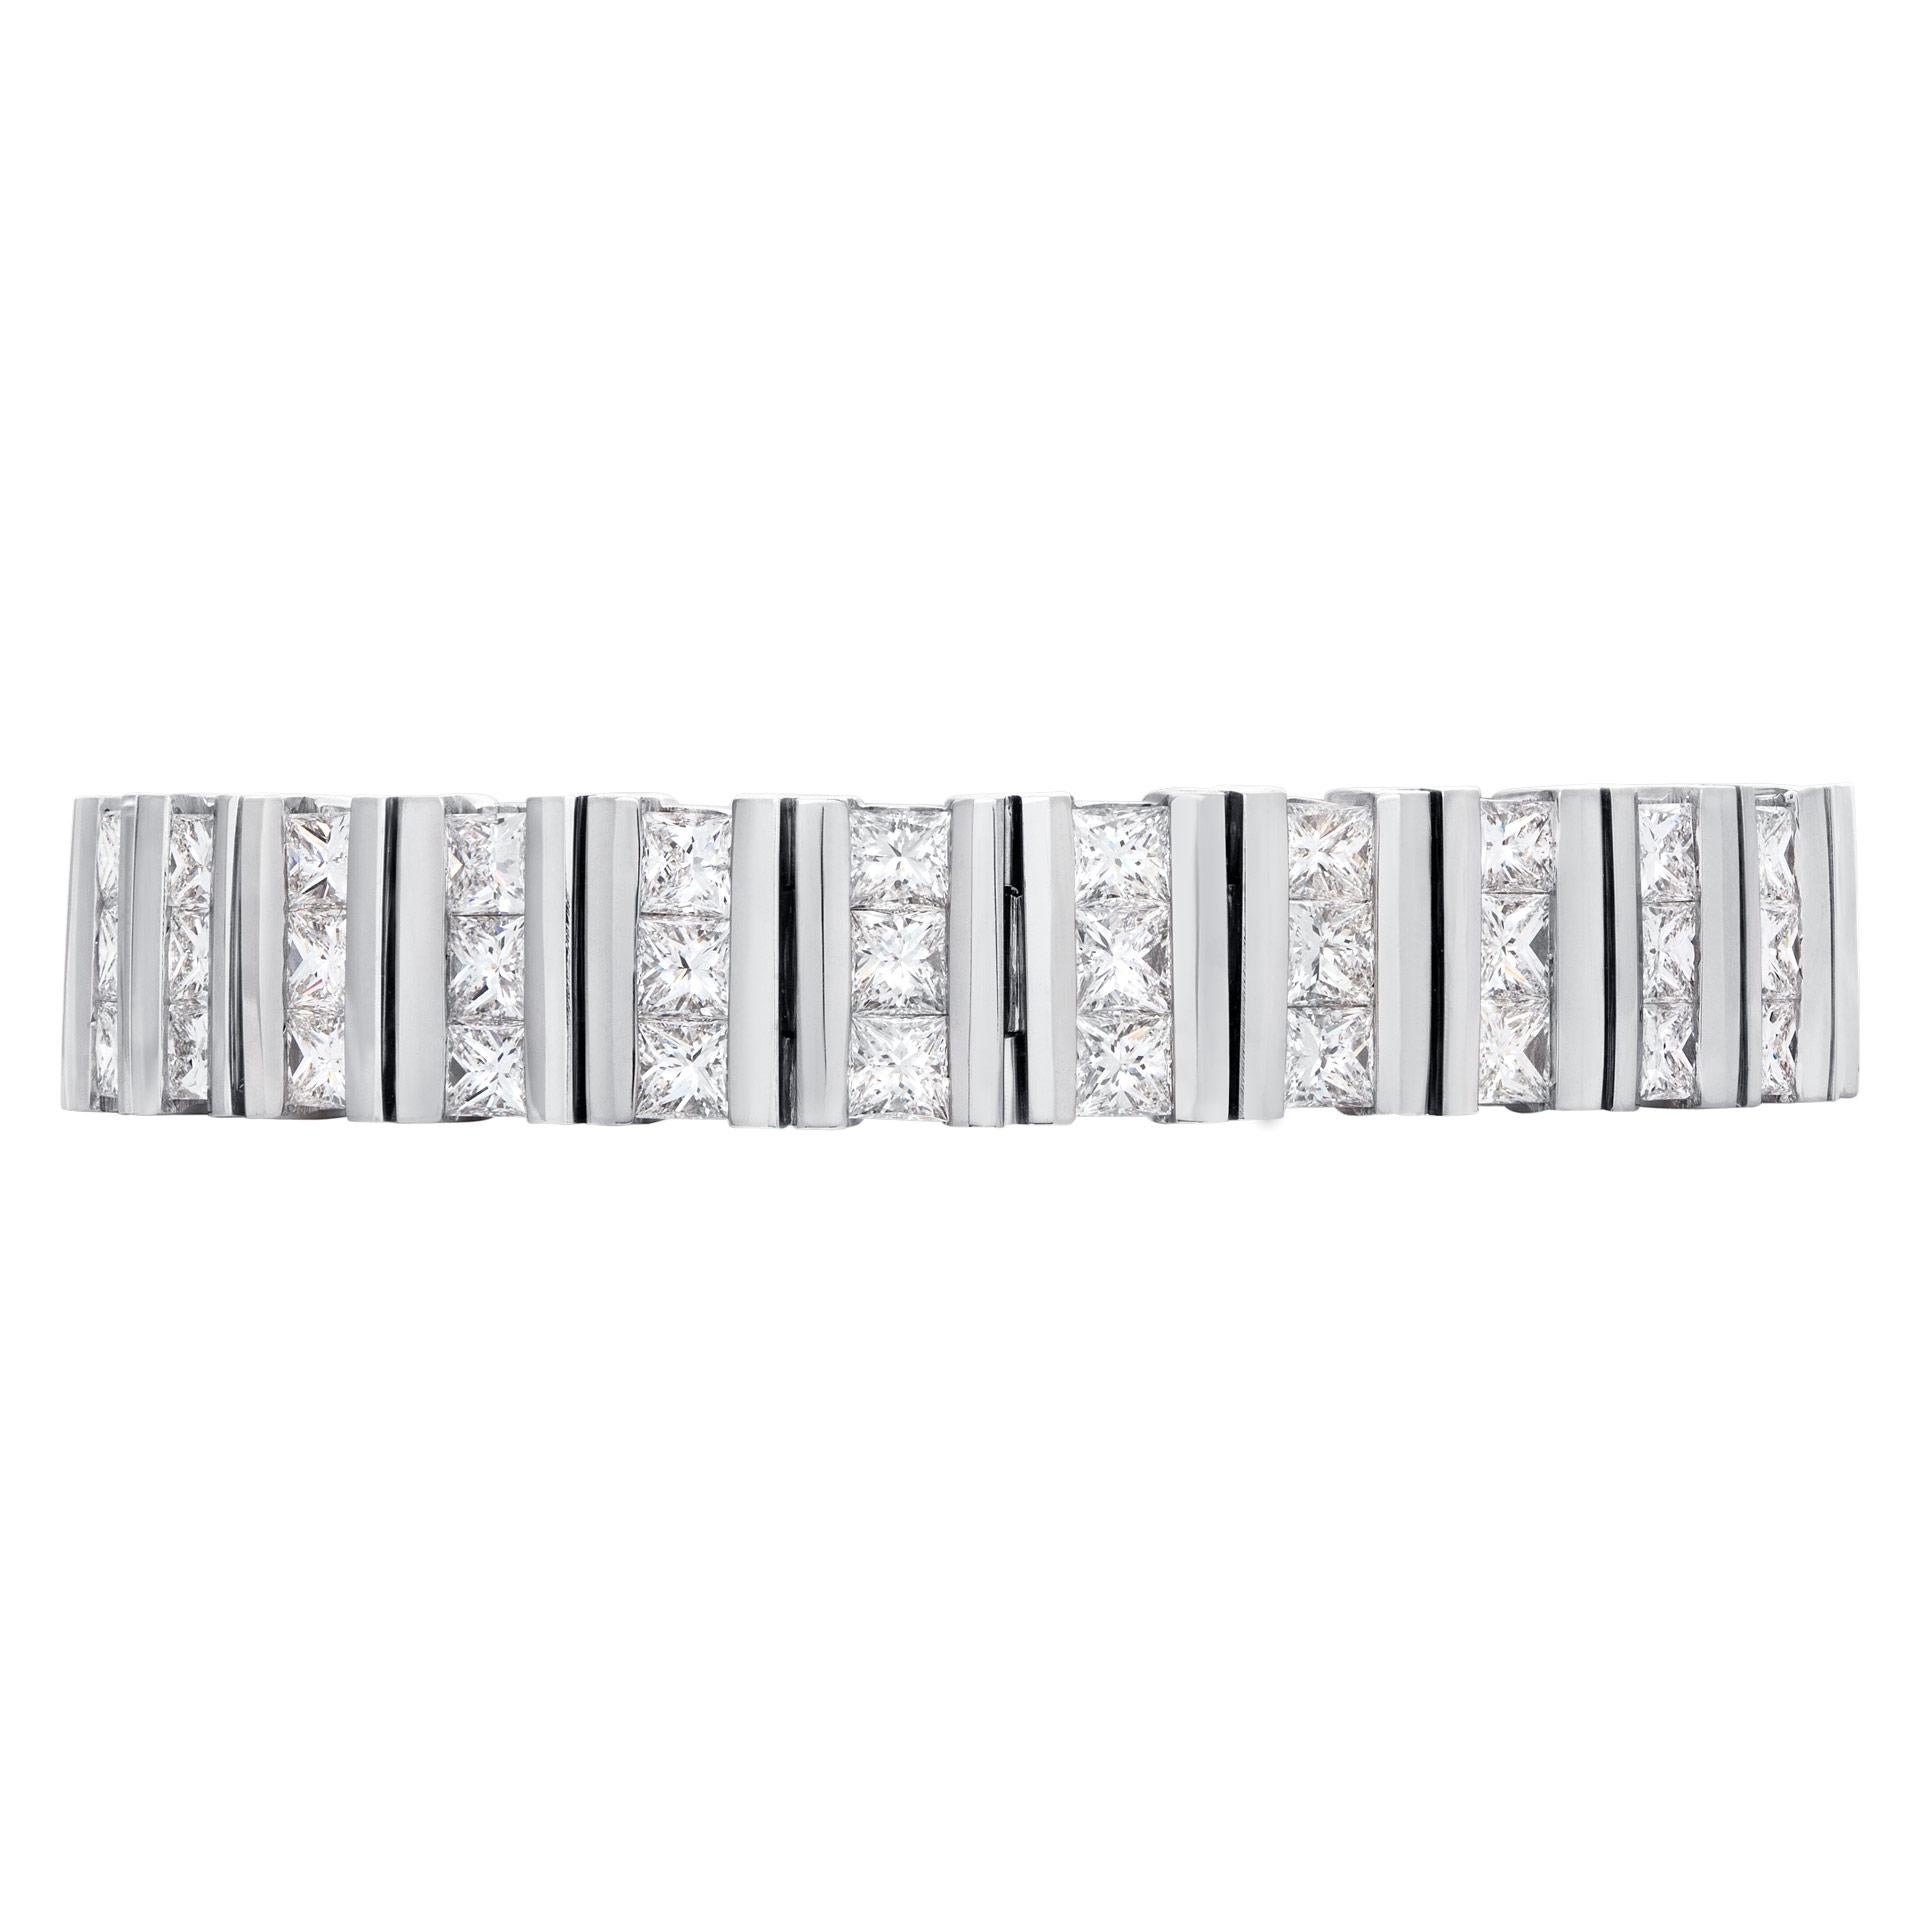 Channel set princess cut diamond bracelet in 18k white gold, over 16.20 carats in princess cut G-H color, VS-SI clarity diamonds. Width: 11.0mm. Length 7.5 inches.
